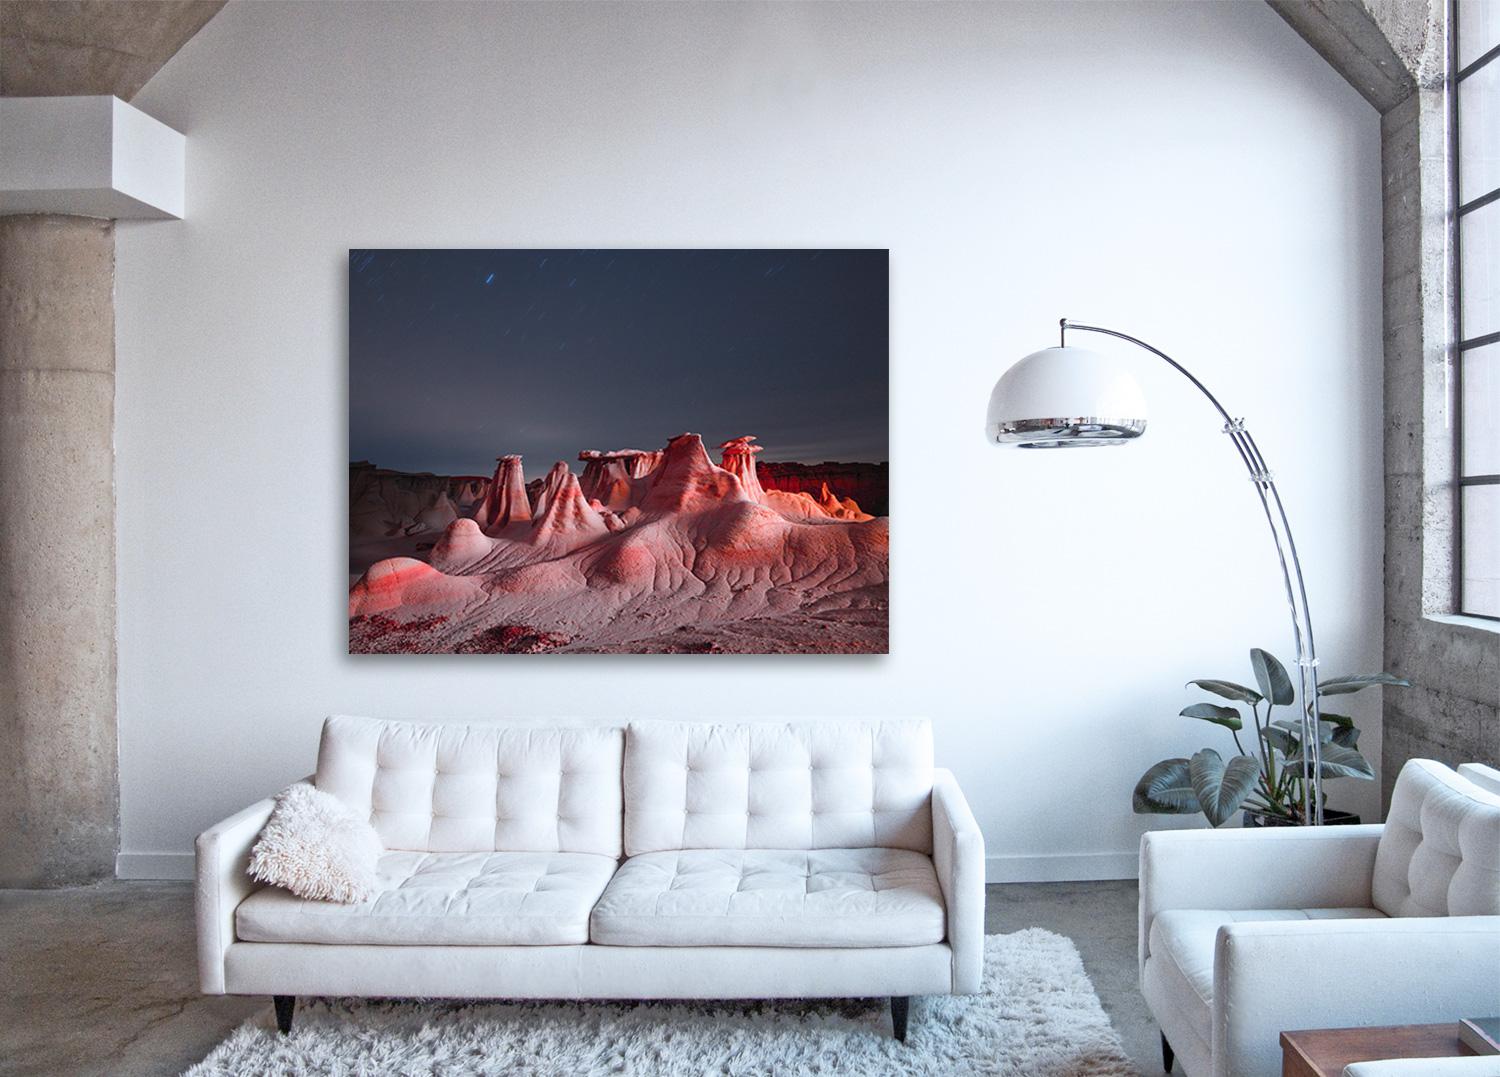 Lux Noctis LN3754 - large format photograph of illuminated nocturnal landscape - Contemporary Photograph by Reuben Wu